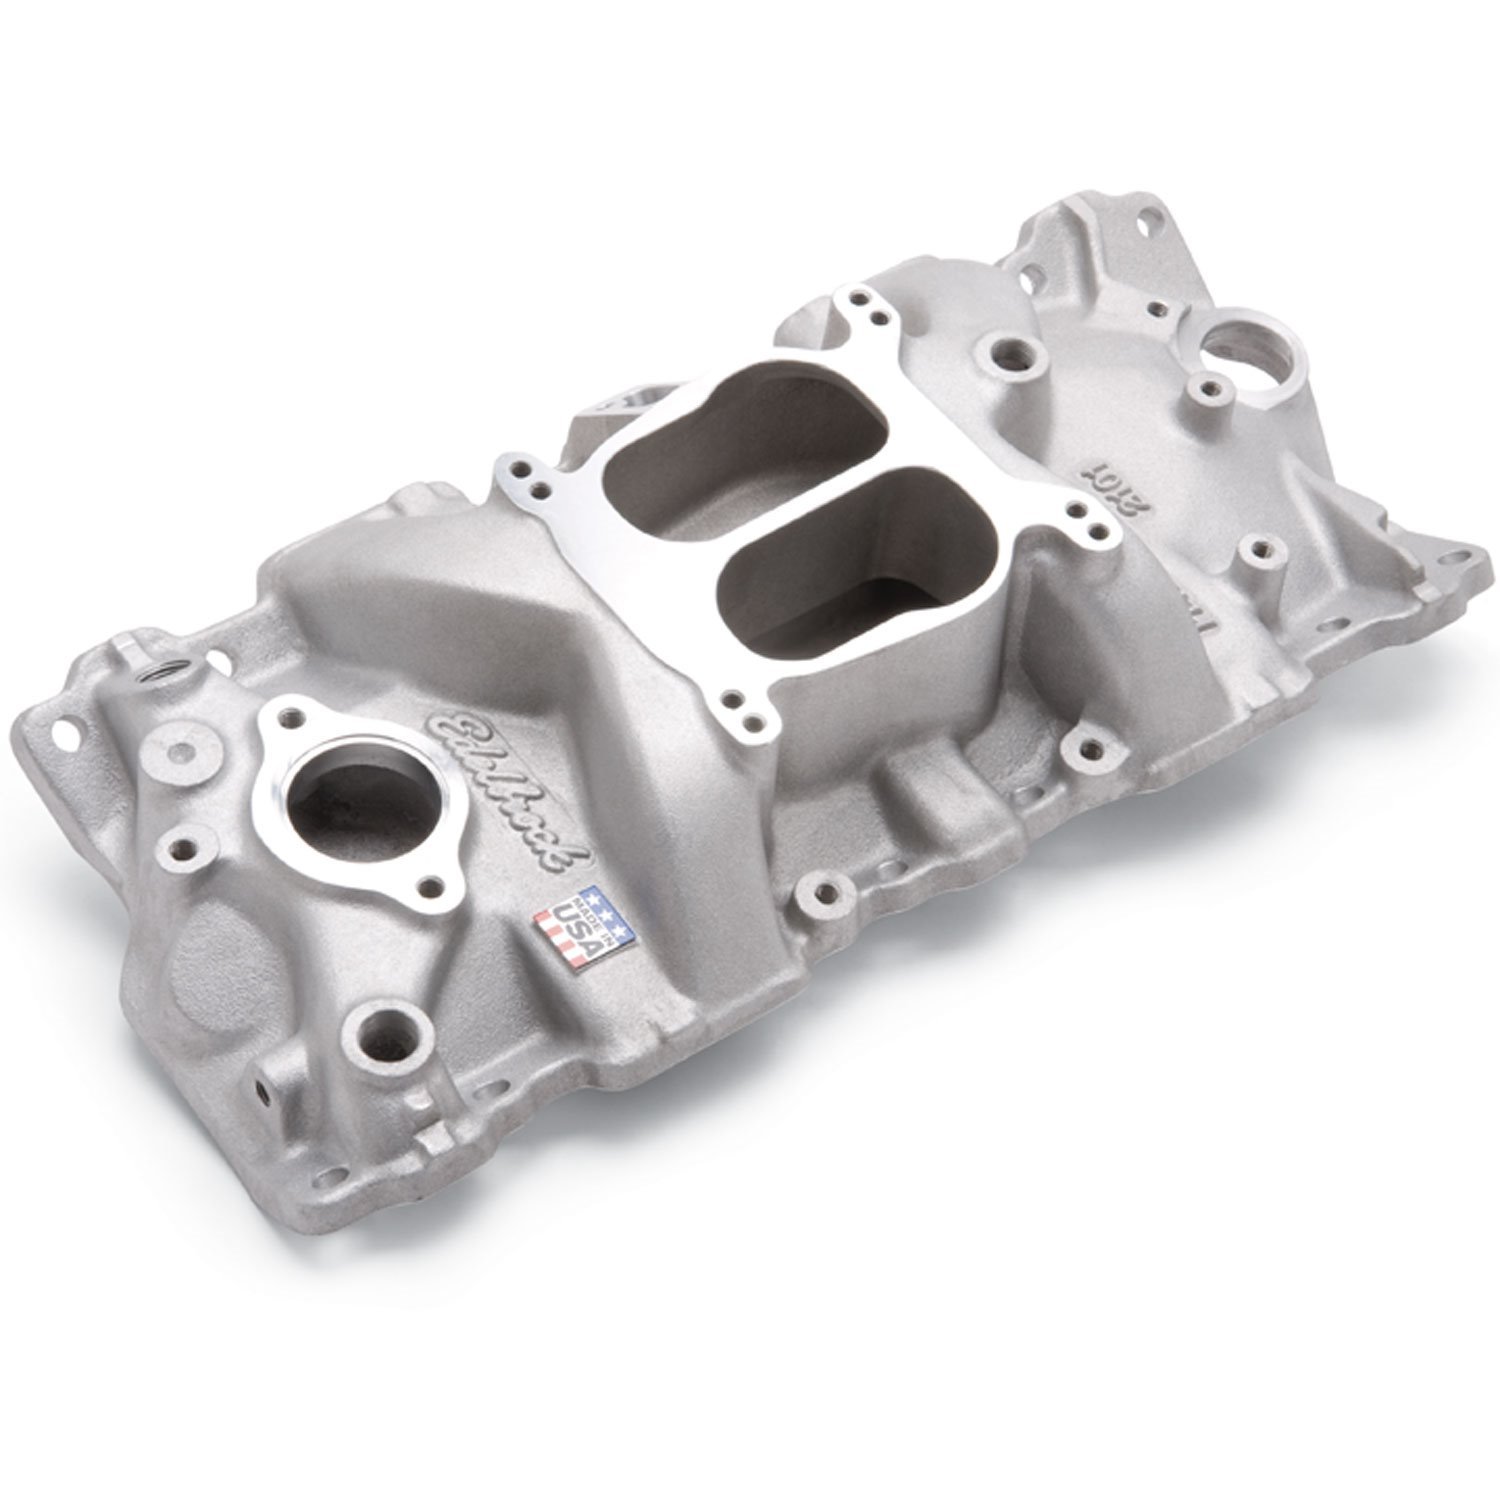 Performer Intake Manifold for 1955-1986 Small Block Chevy